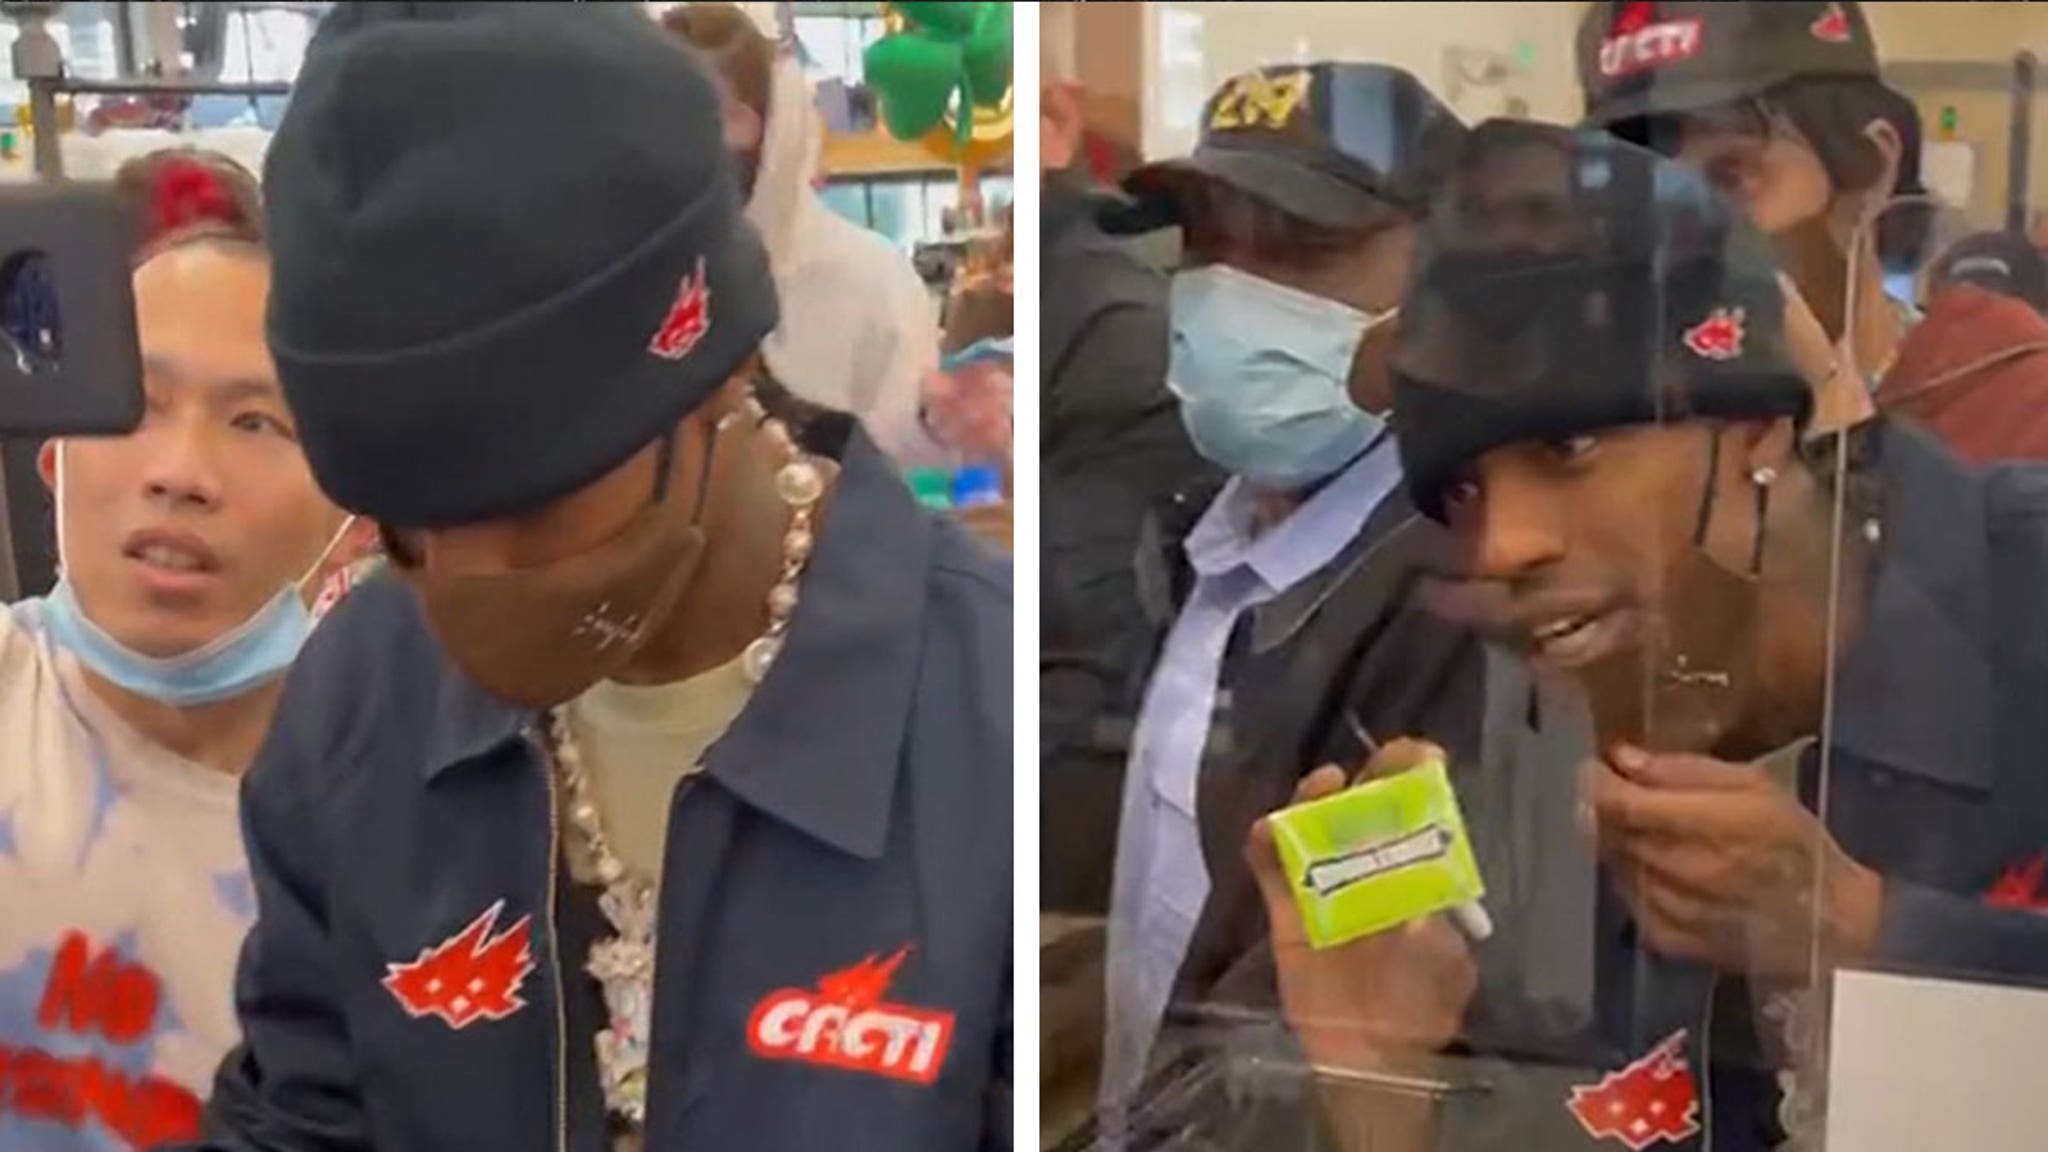 Travis Scott causes chaotic scene in grocery store